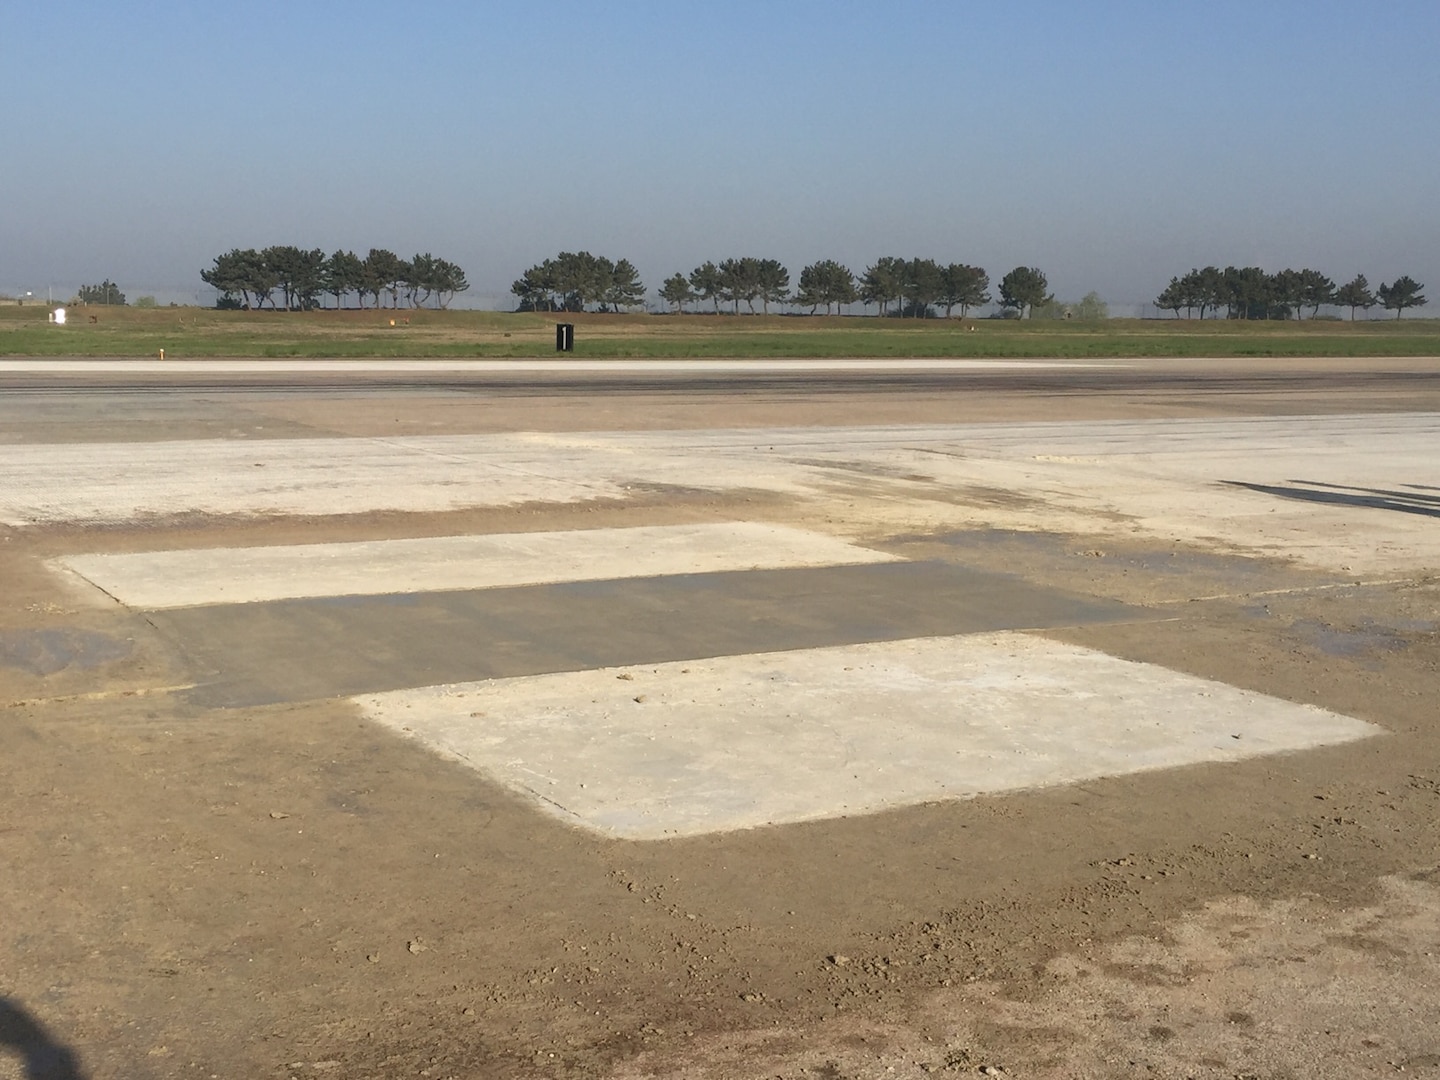 The 8th Civil Engineer Squadron, the Legendary Red Devils, completed a repair on a 7 foot by 8 foot surface and 4 foot deep sinkhole on the runway at Kunsan Air Base, Republic of Korea, May 2, 2019. The 8th Civil Engineer Squadron and 8th Logistics Readiness Squadron made the flight line operational again just 24 hours after it was shut down to repair a sinkhole. (Courtesy photo)